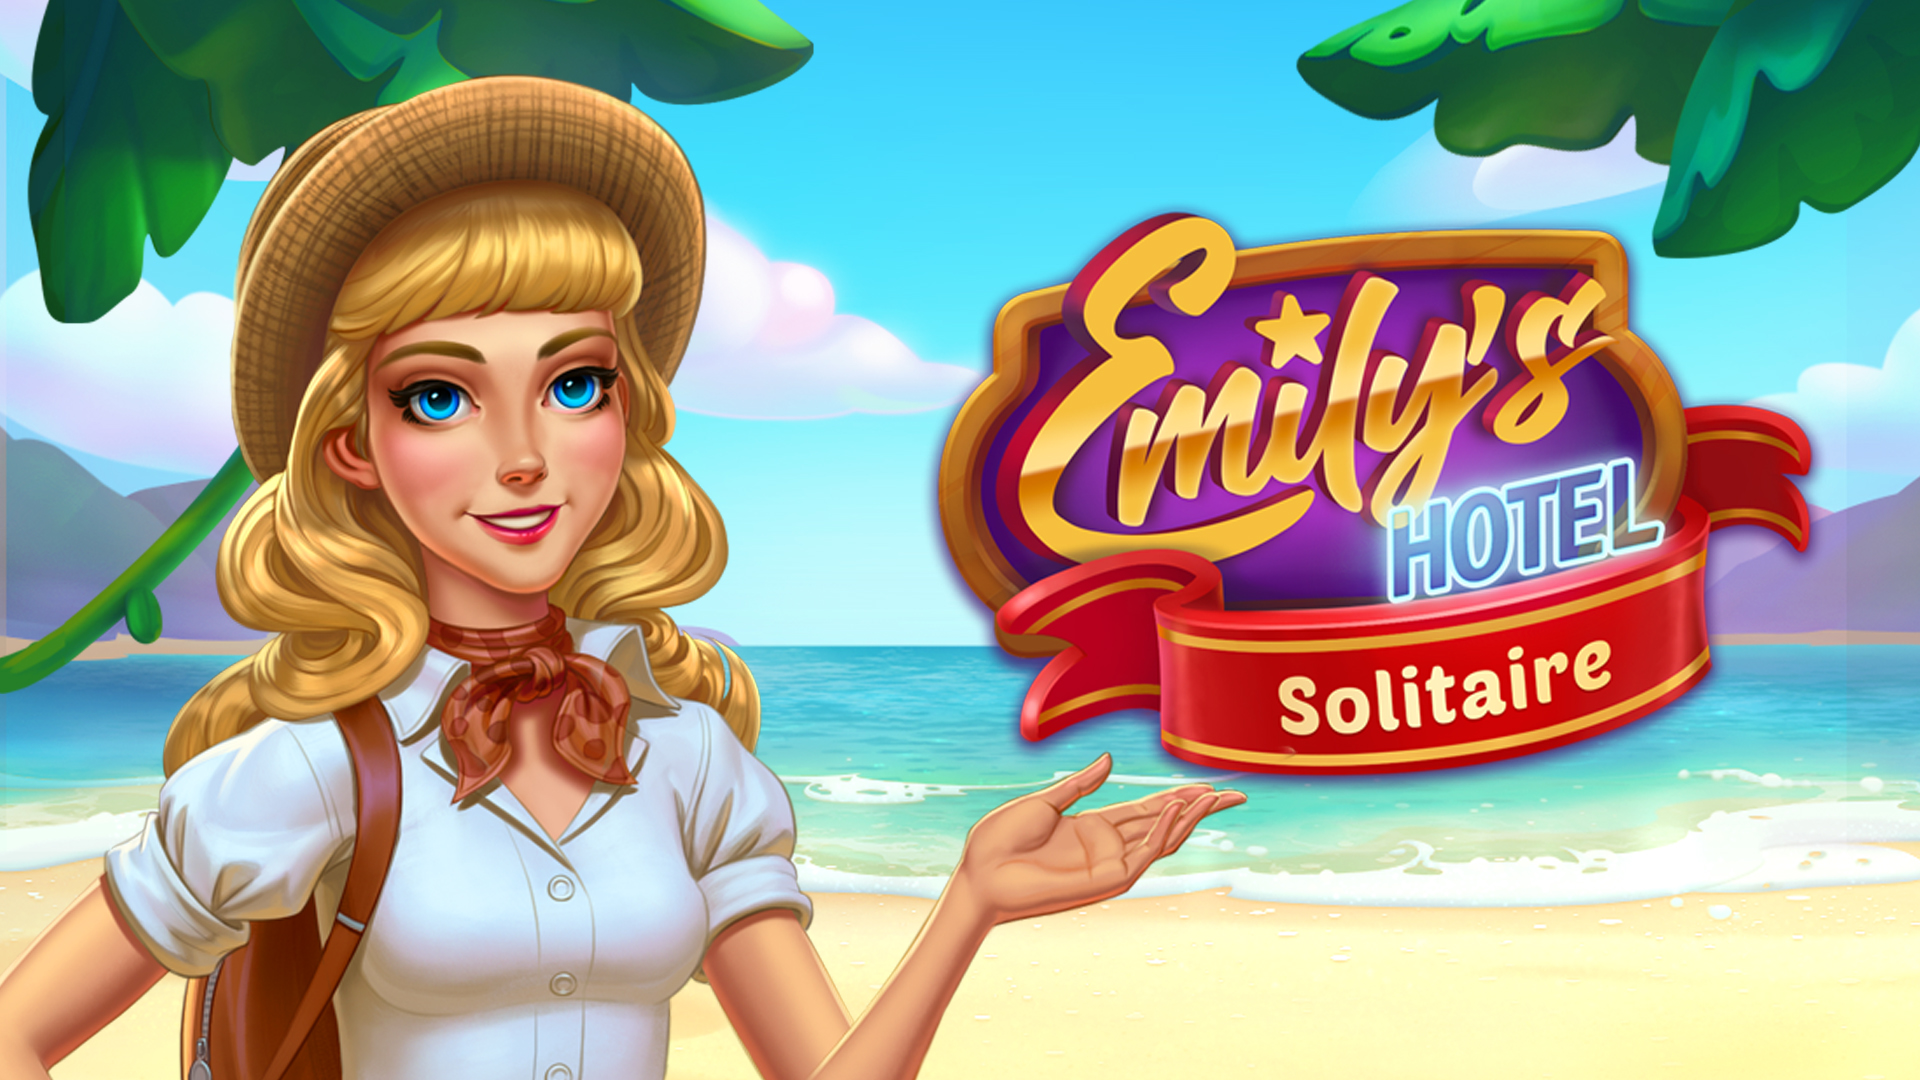 Emilys Hotel Solitaire Game Image